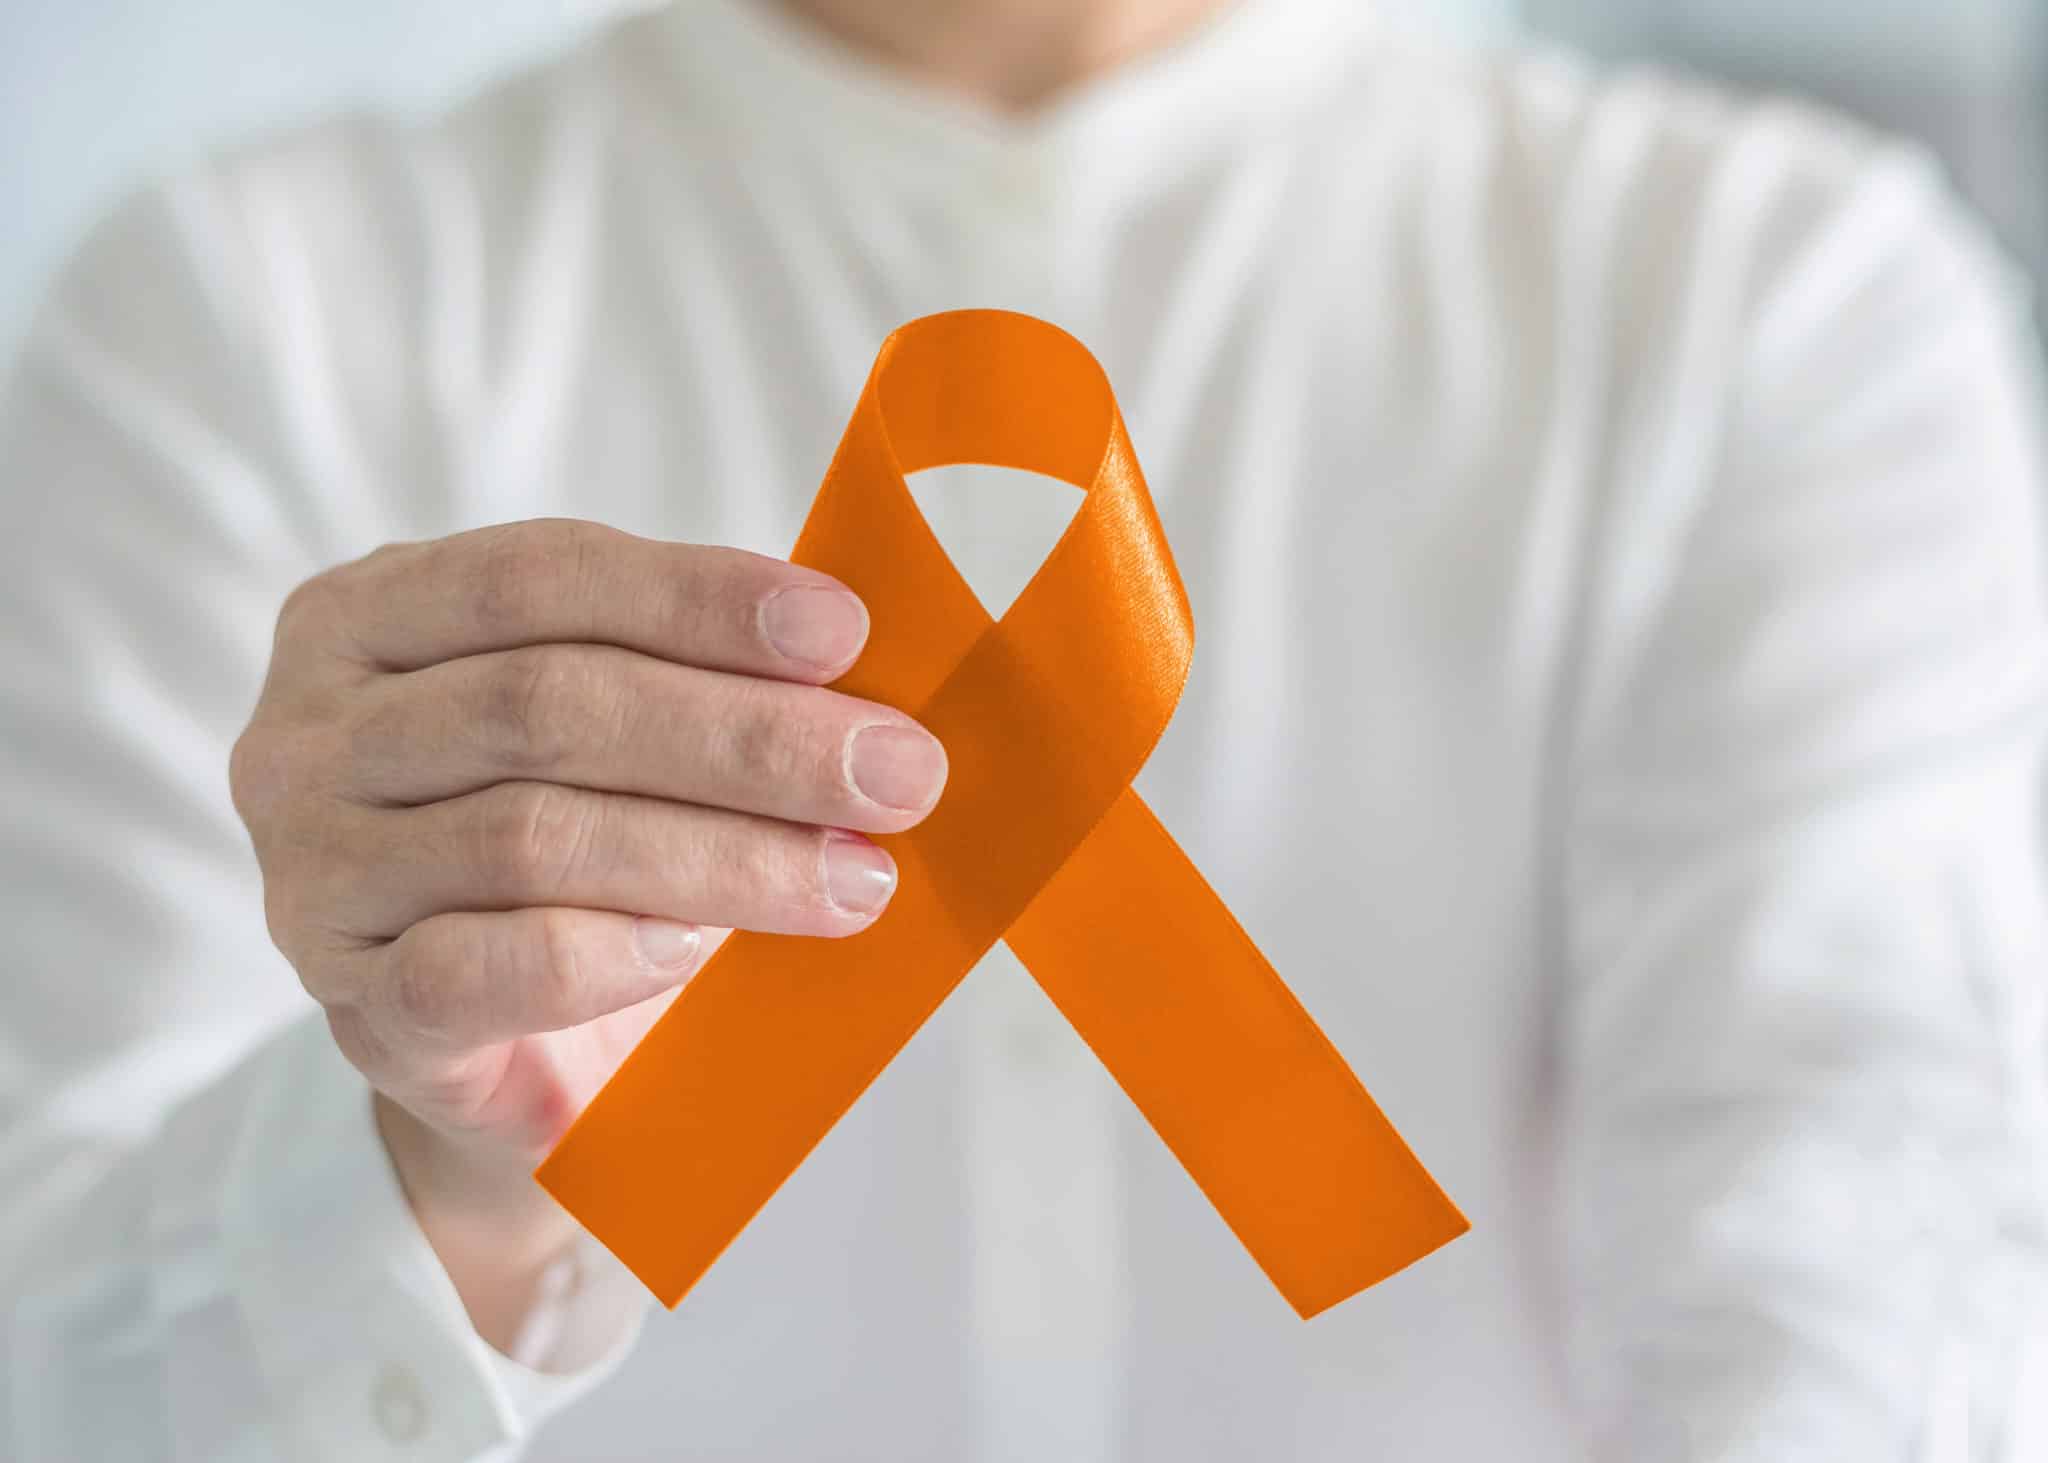 Orange ribbon for awareness on Leukemia, Kidney cancer, RDS disease, multiple sclerosis, ADHD illness, Chronic Obstructive Pulmonary Disease (COPD) in person's hand